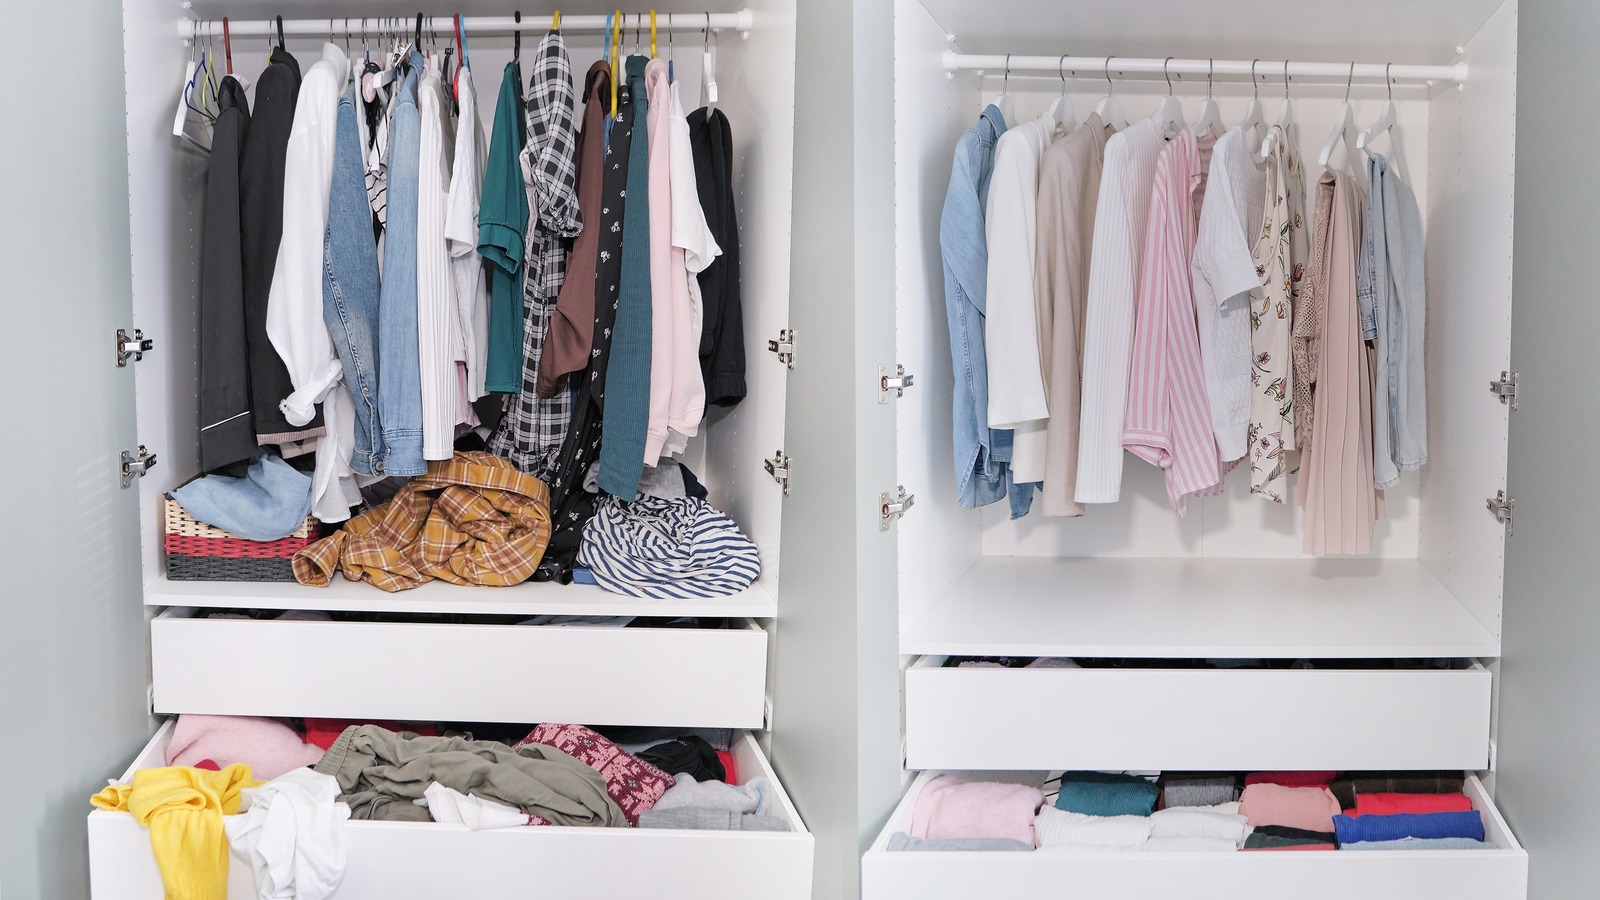 https://www.housedigest.com/img/gallery/an-expert-explains-the-best-way-to-organize-your-closet/l-intro-1670536312.jpg